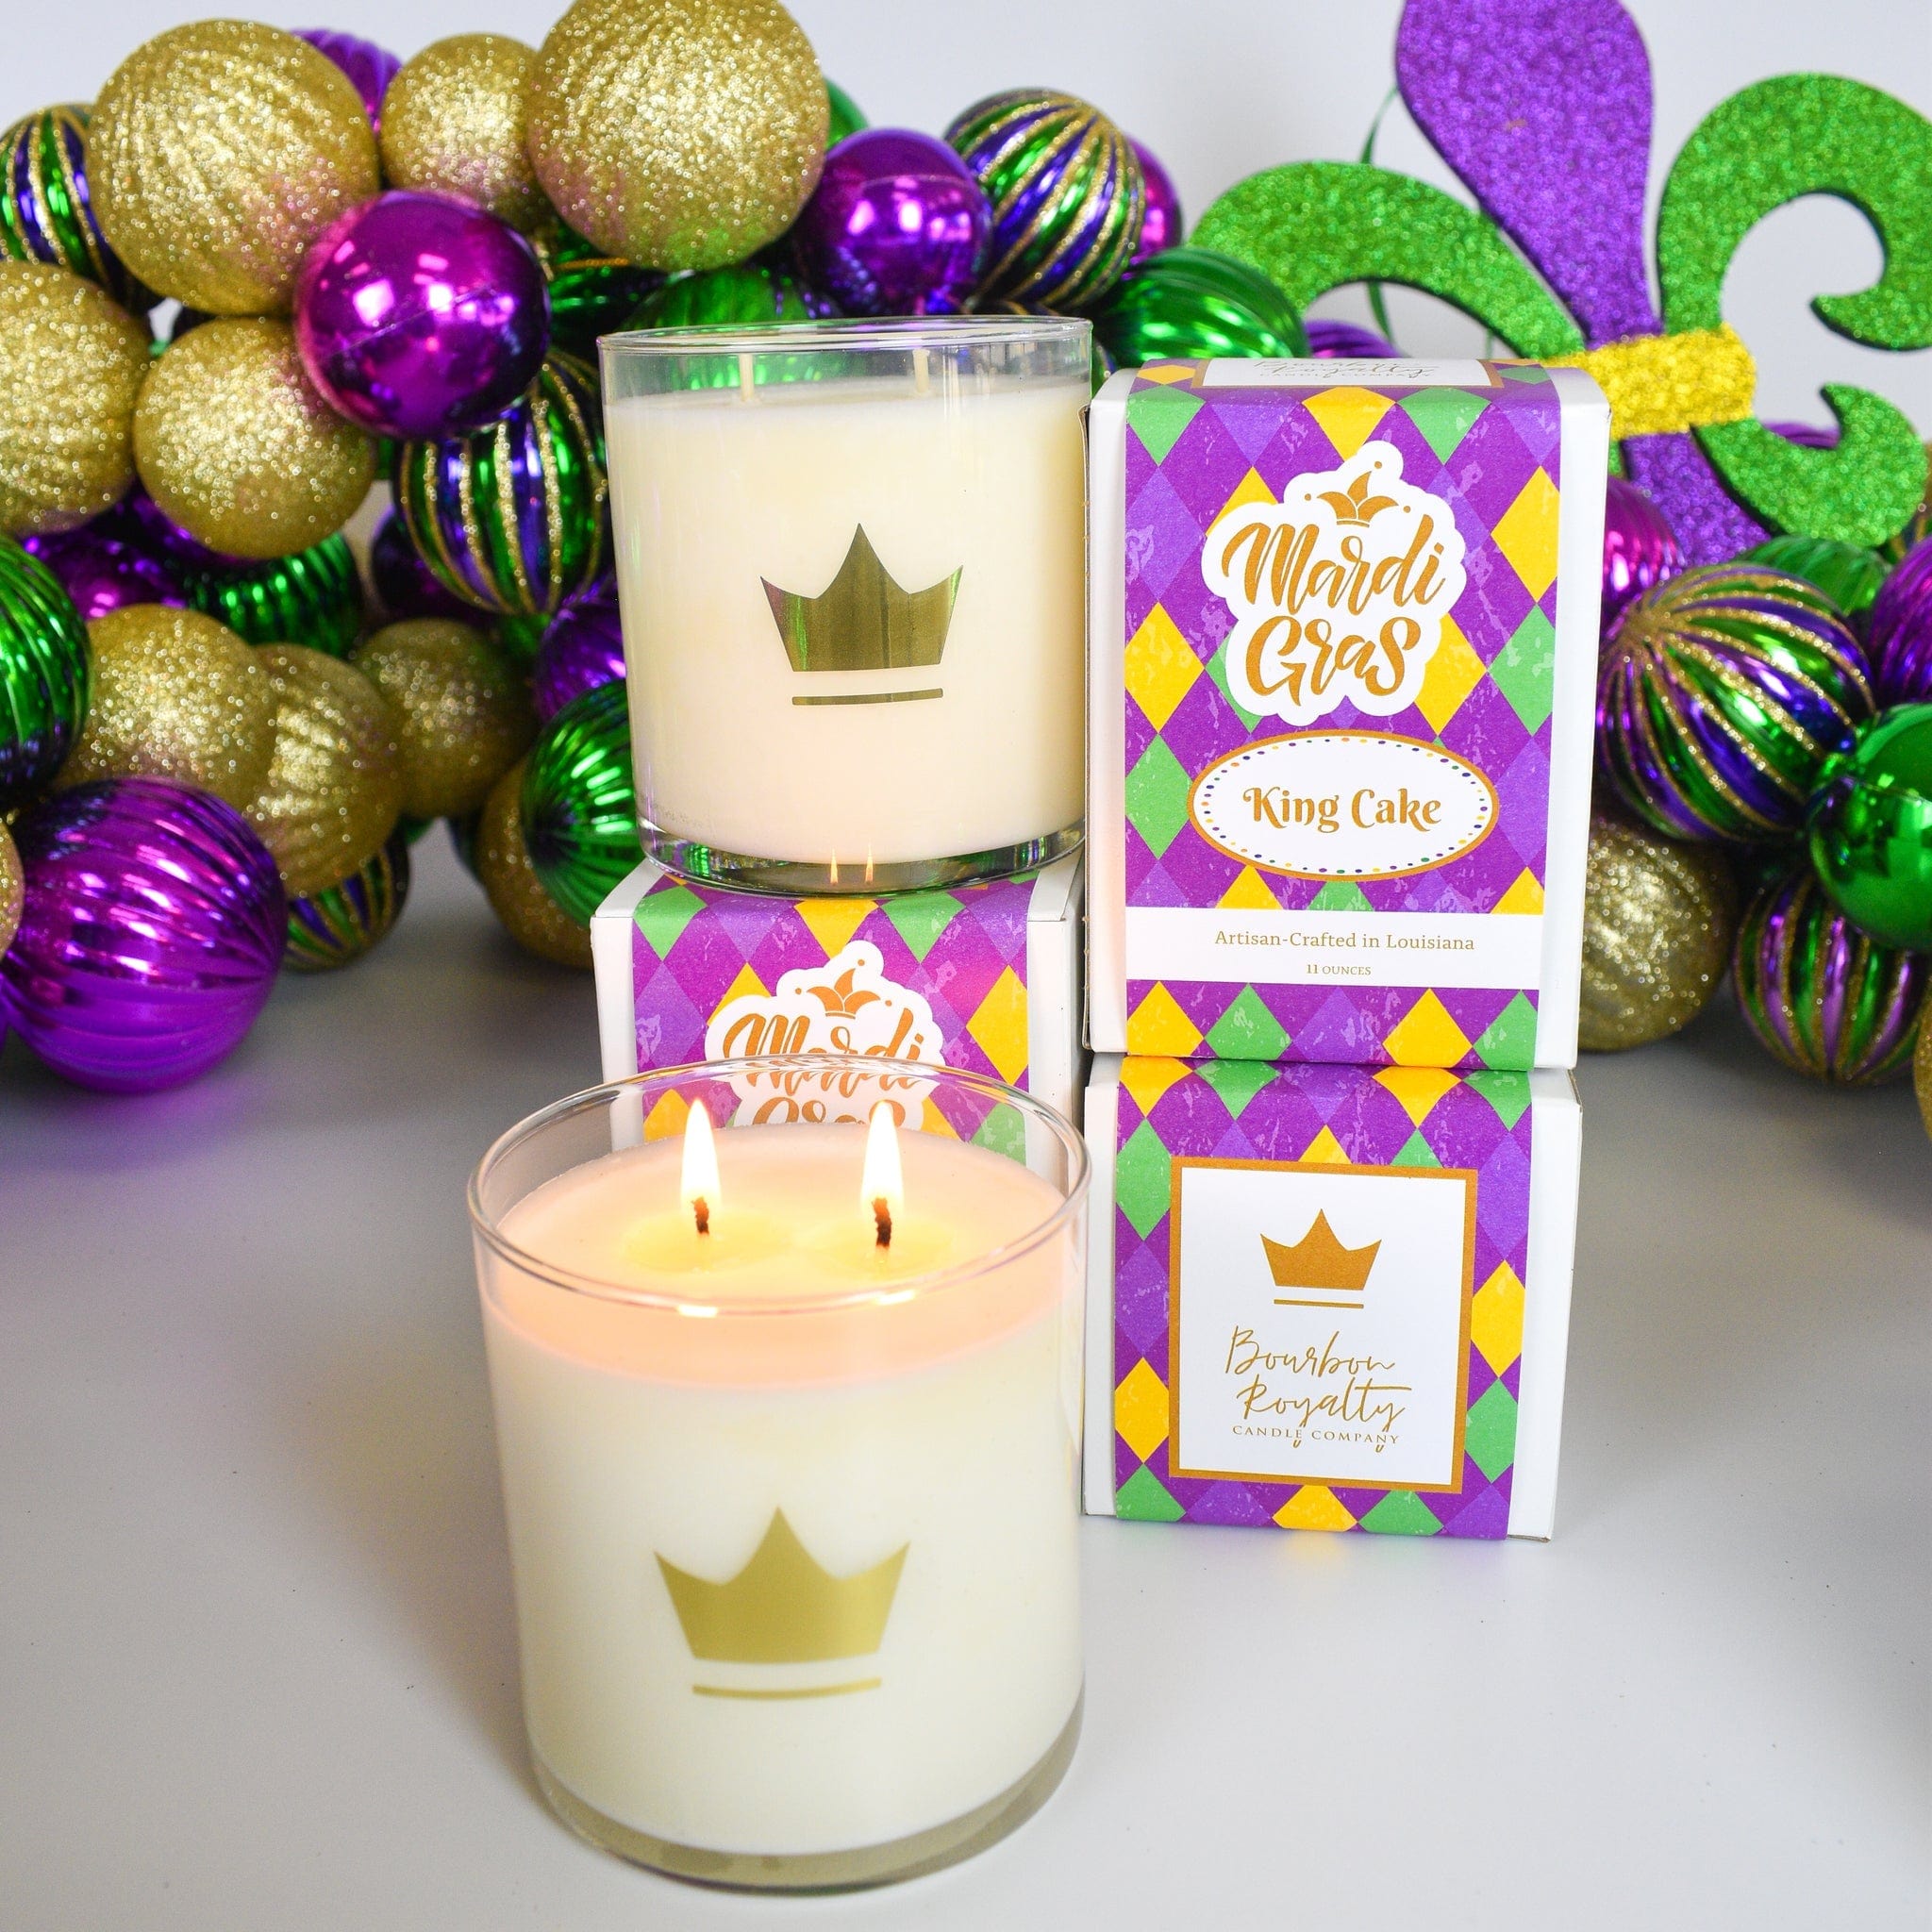 Bourbon Royalty Candle Co Bourbon Royalty Candle Co King Cake Mardi Gras Candle - Little Miss Muffin Children & Home